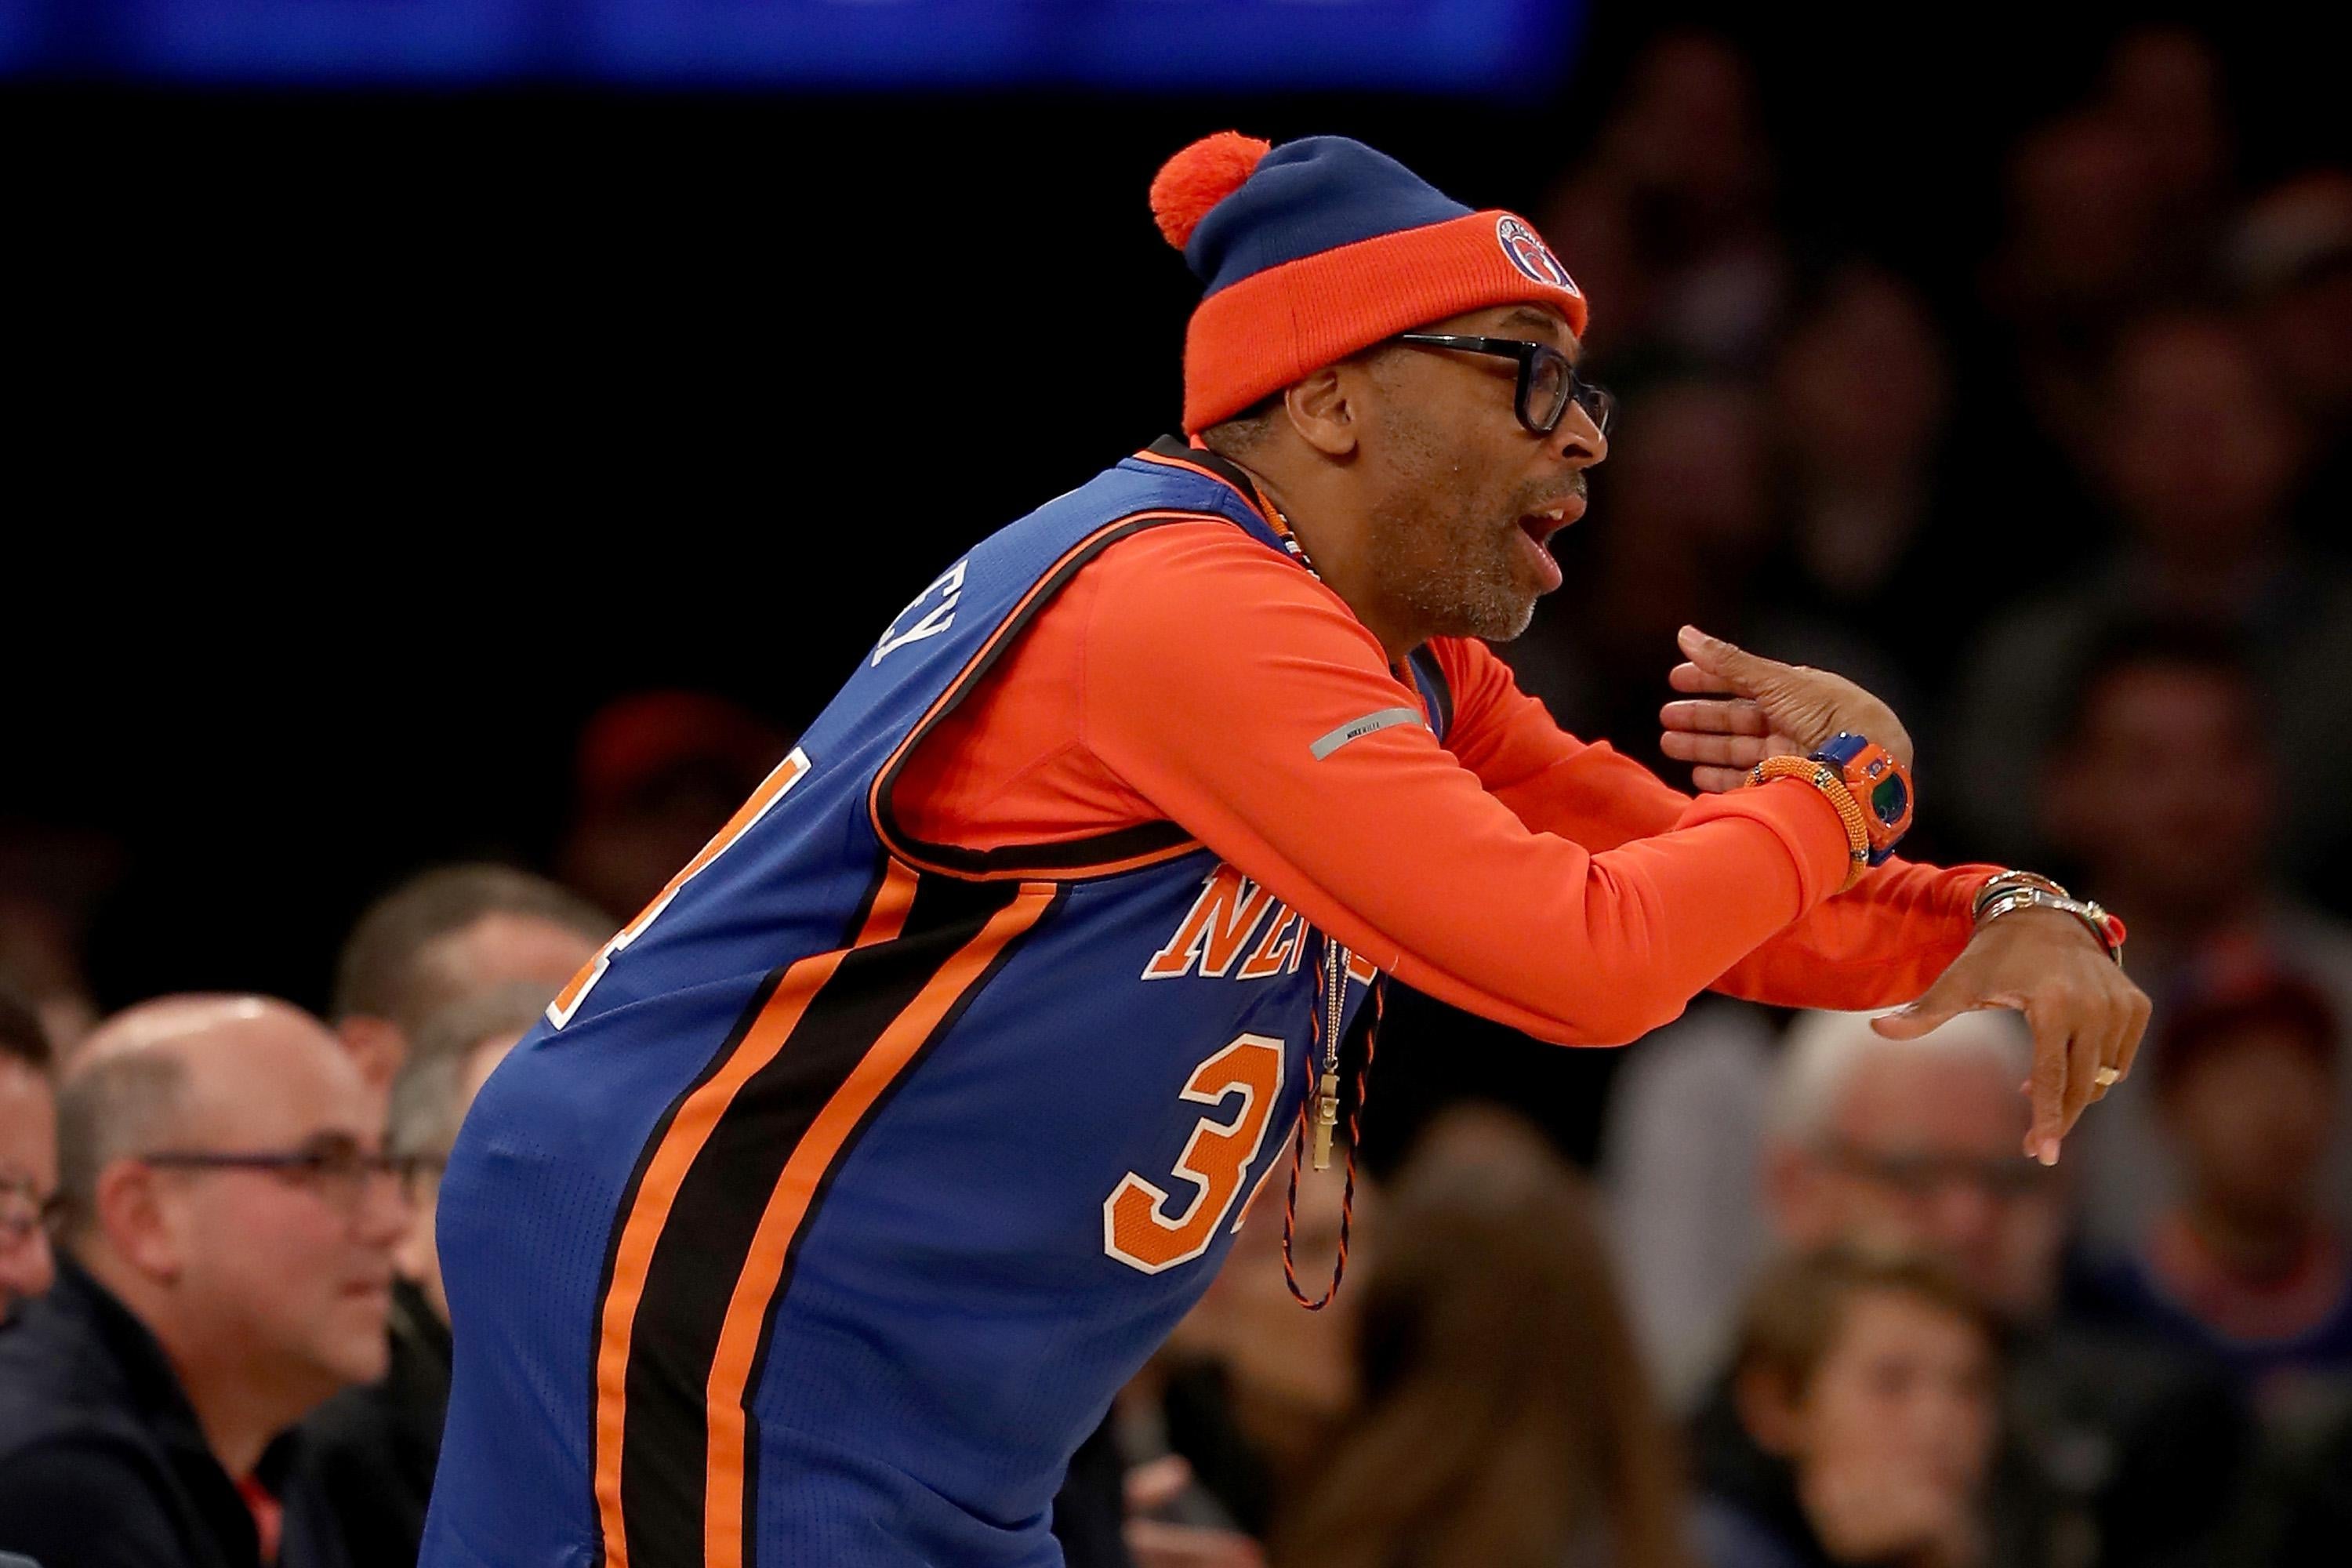 Spike Lee wearing a Knicks jersey, gesturing courtside at a game between the New York Knicks and the San Antonio Spurs in New York on Feb. 12, 2017.